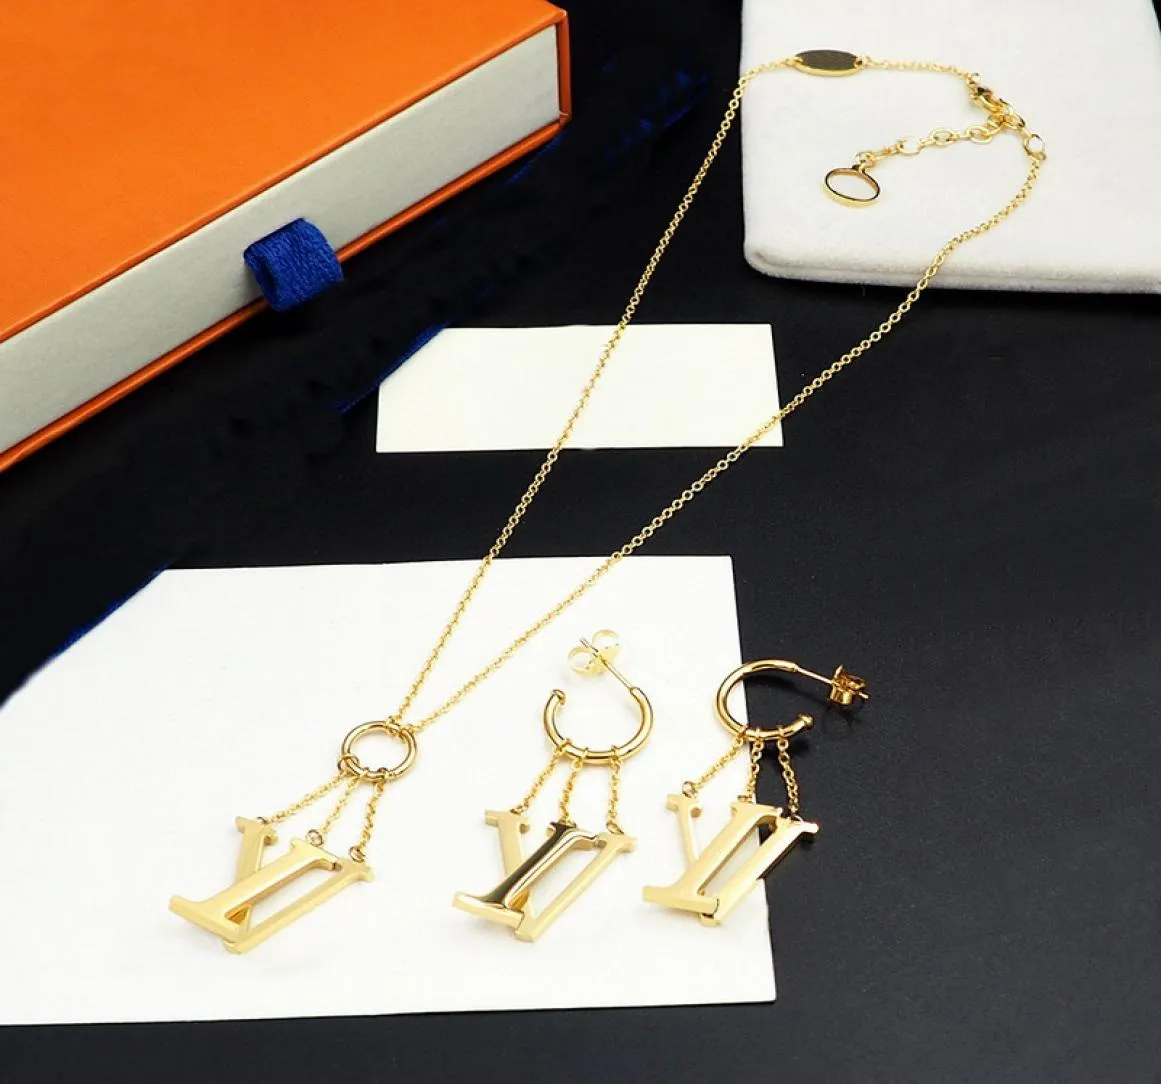 Europe America Fashion Style Jewelry Sets Lady Women Goldcolour Hardware Engraved V Initials Dangling Charm Optic Necklace Earrin5764362